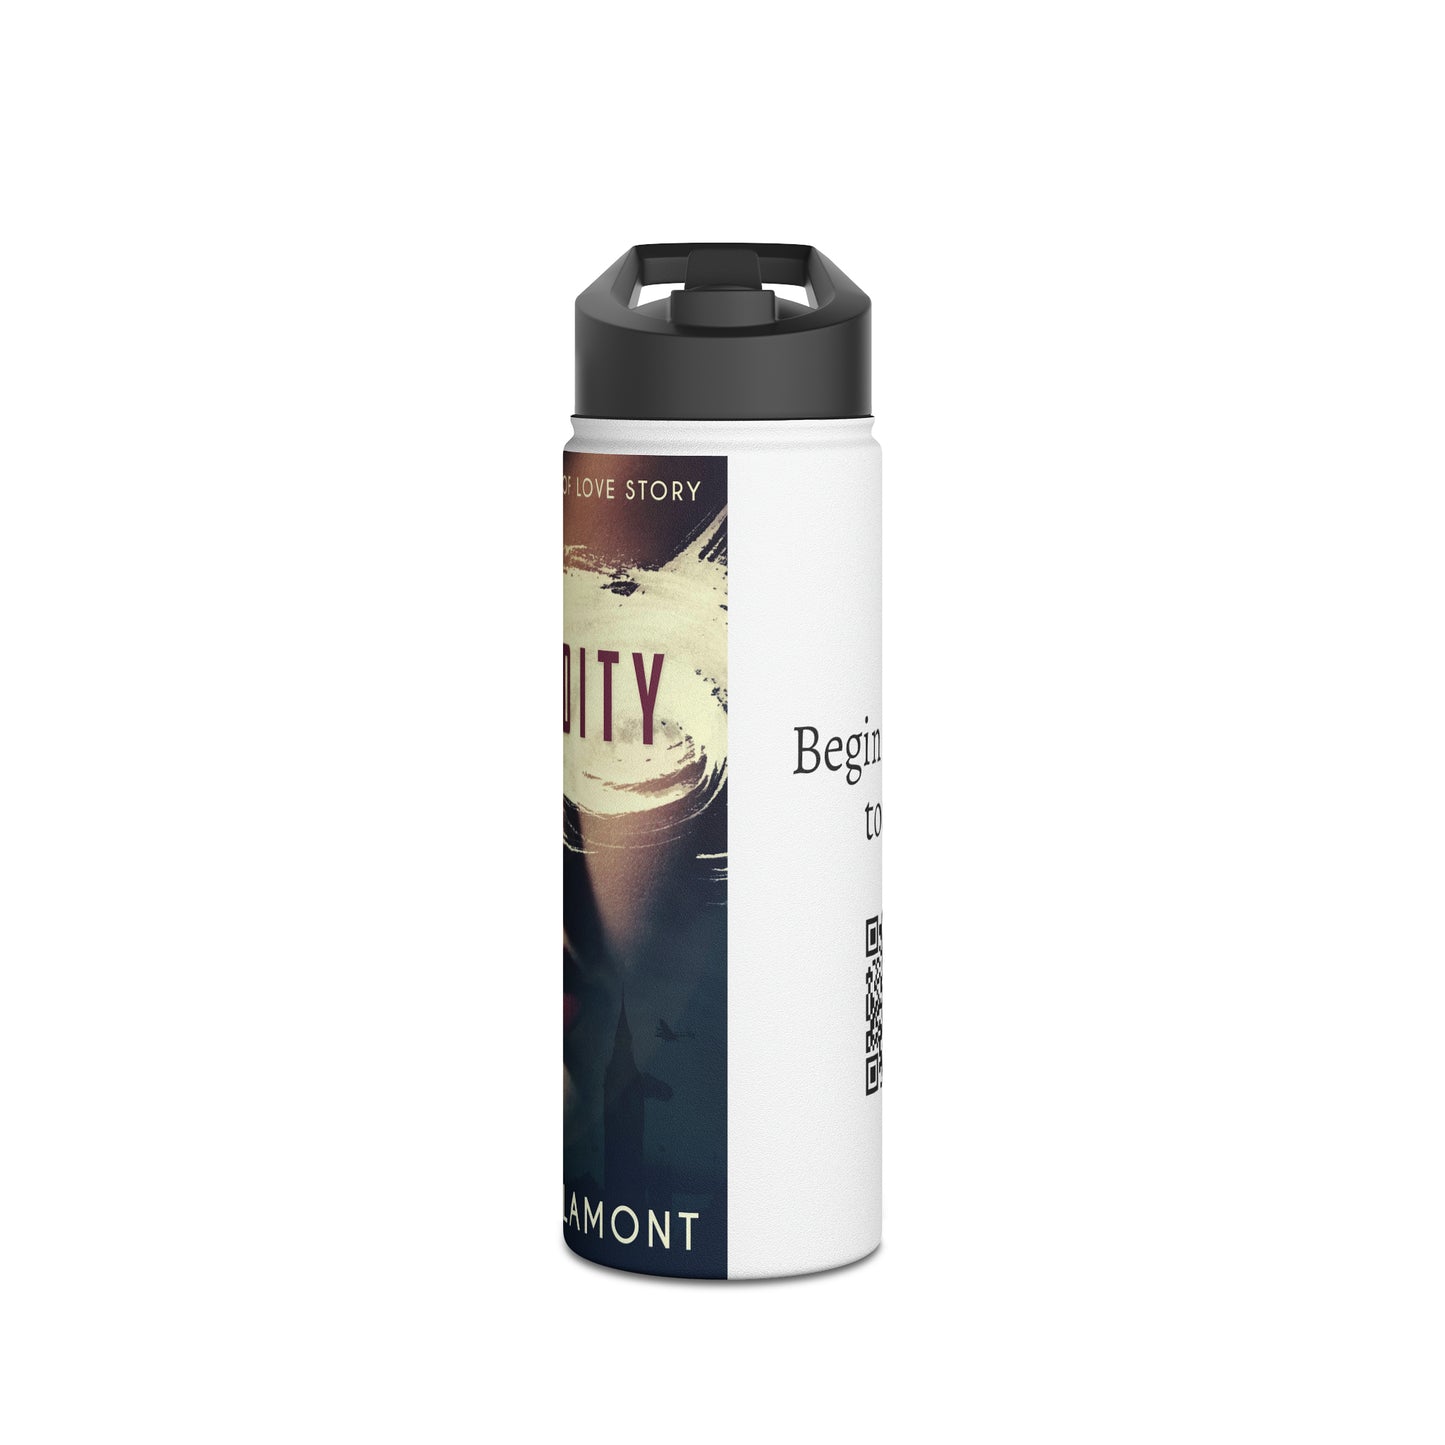 Cupidity - Stainless Steel Water Bottle